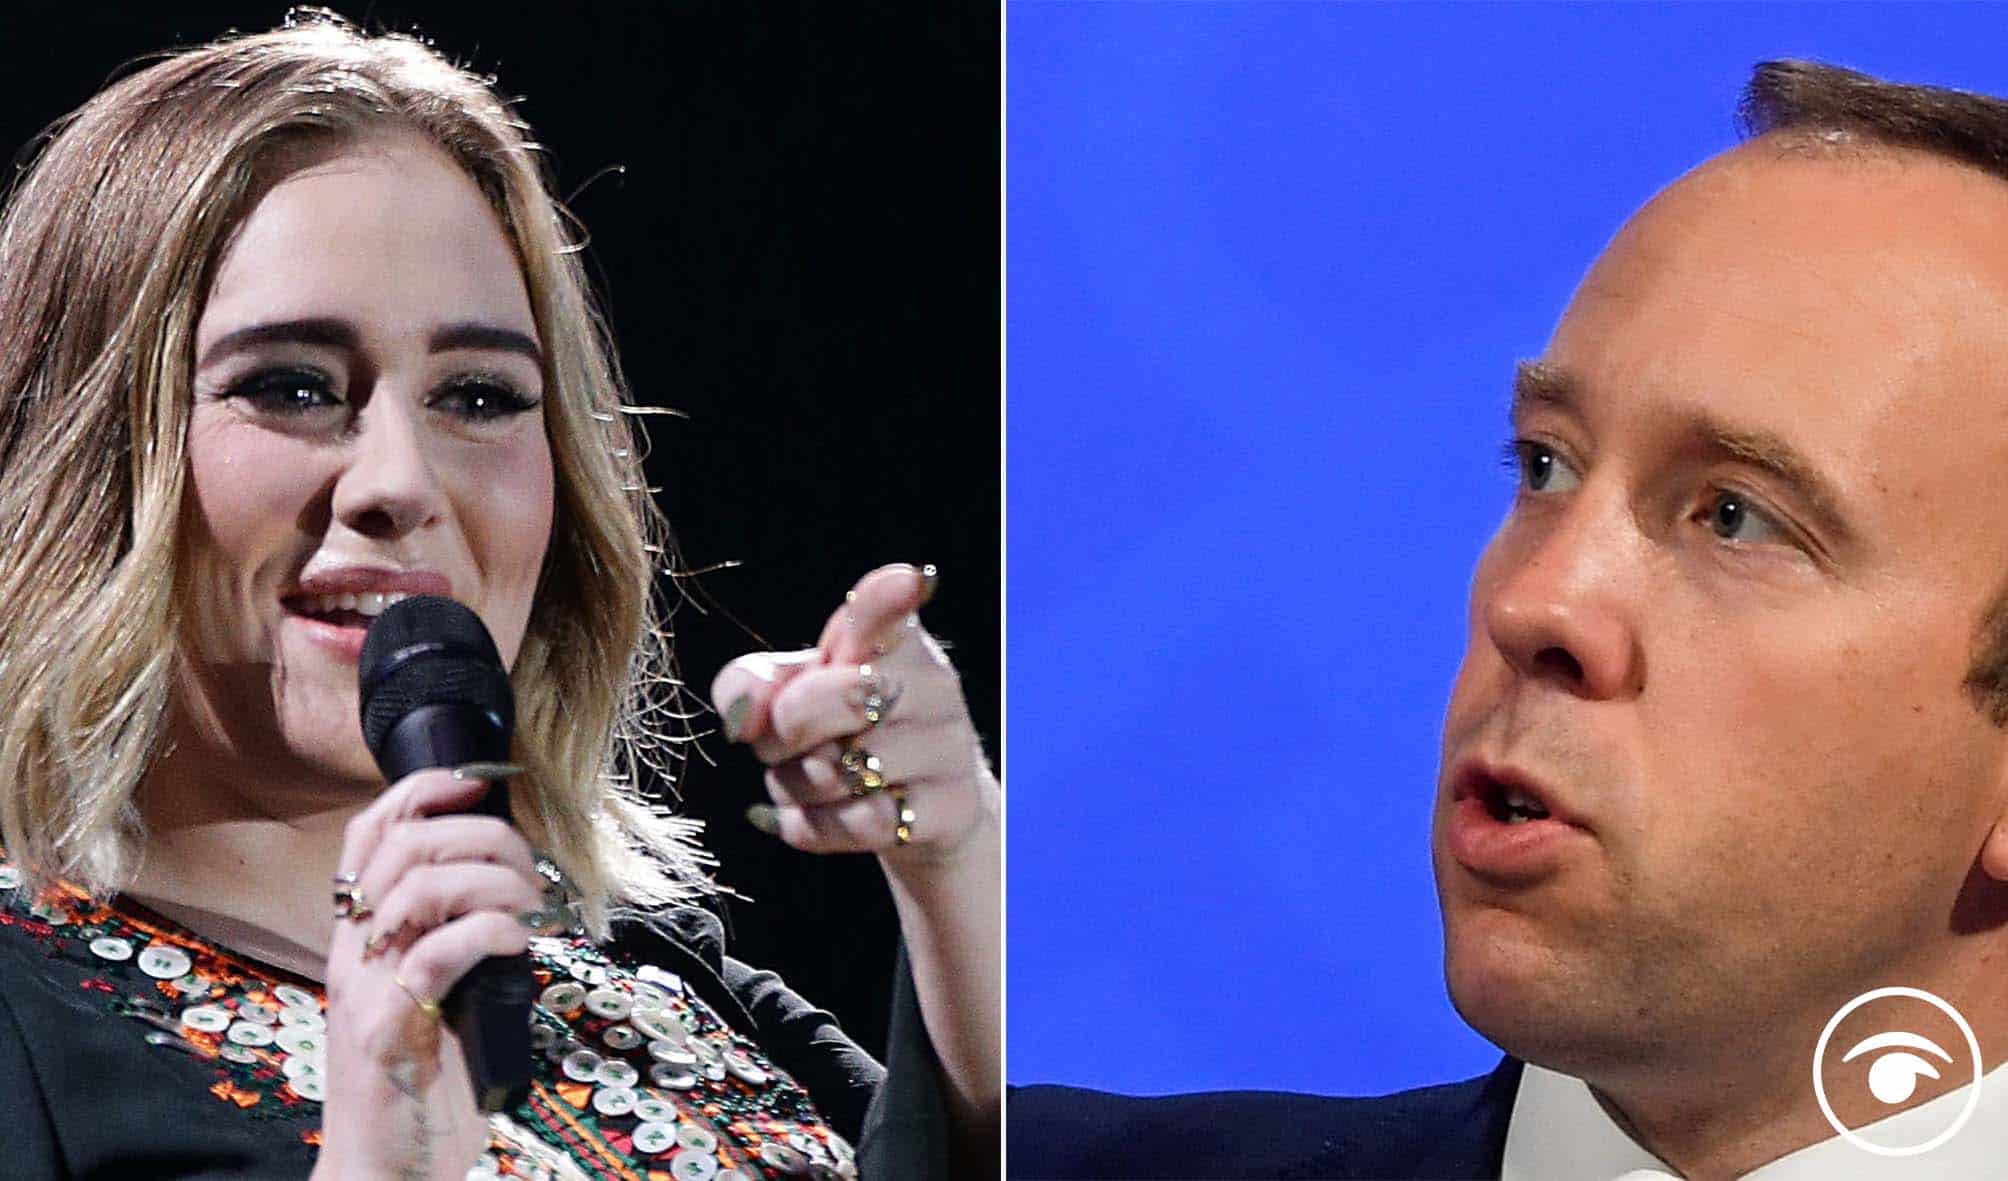 Adele gave her view on Matt Hancock’s affair and a lot of people agreed